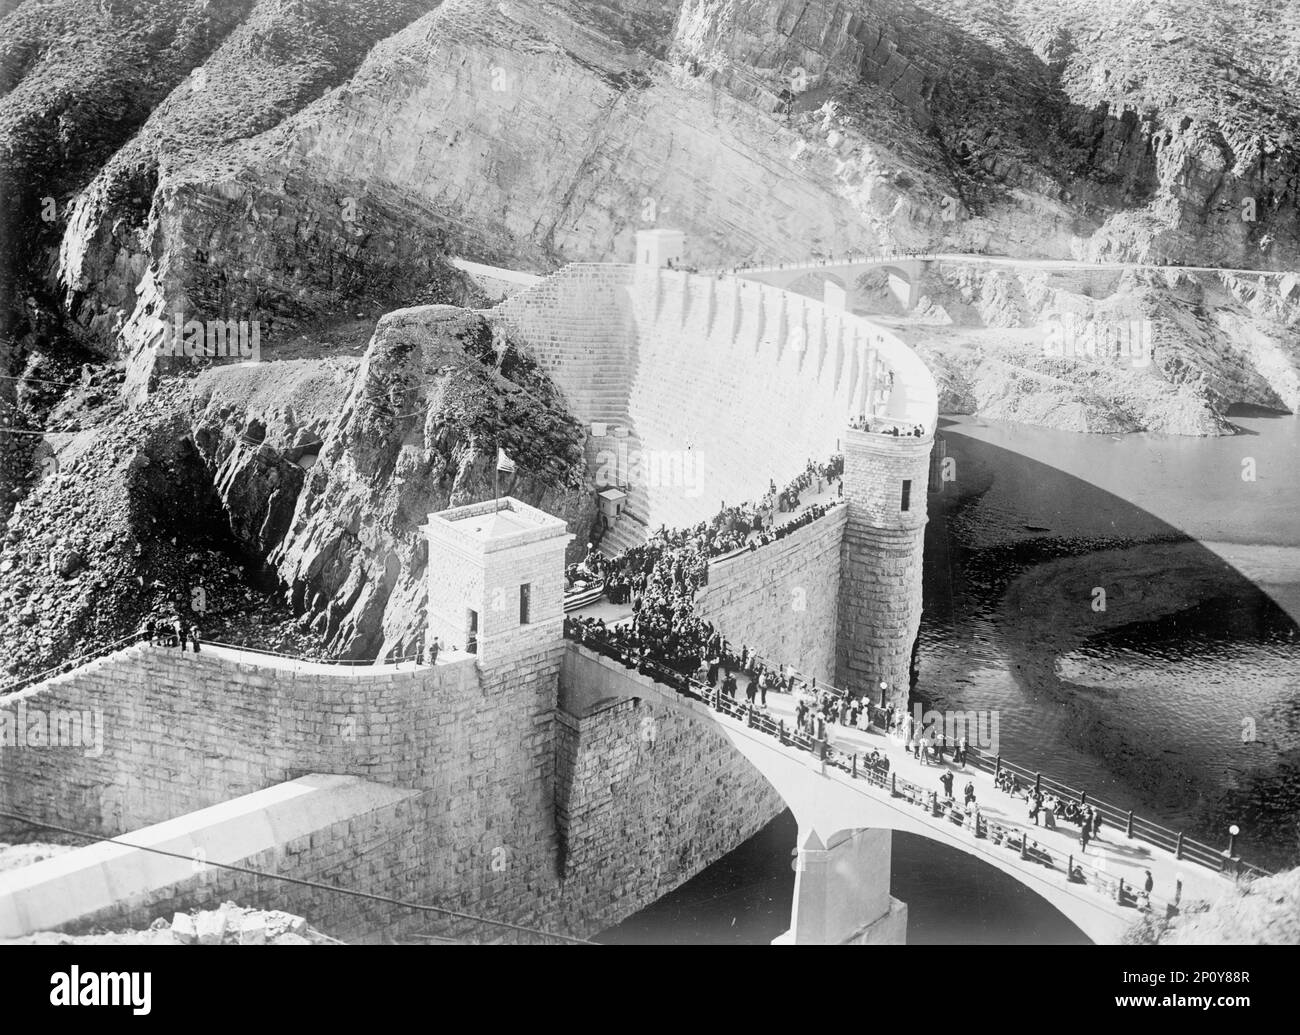 Roosevelt Dam, Arizona - Salt River Project of Bureau of Reclamation, Dedication Scene, 1912. Dam named after President Theodore Roosevelt, serving mainly for irrigation, water supply, and flood control, with hydroelectric generating capacity. Stock Photo